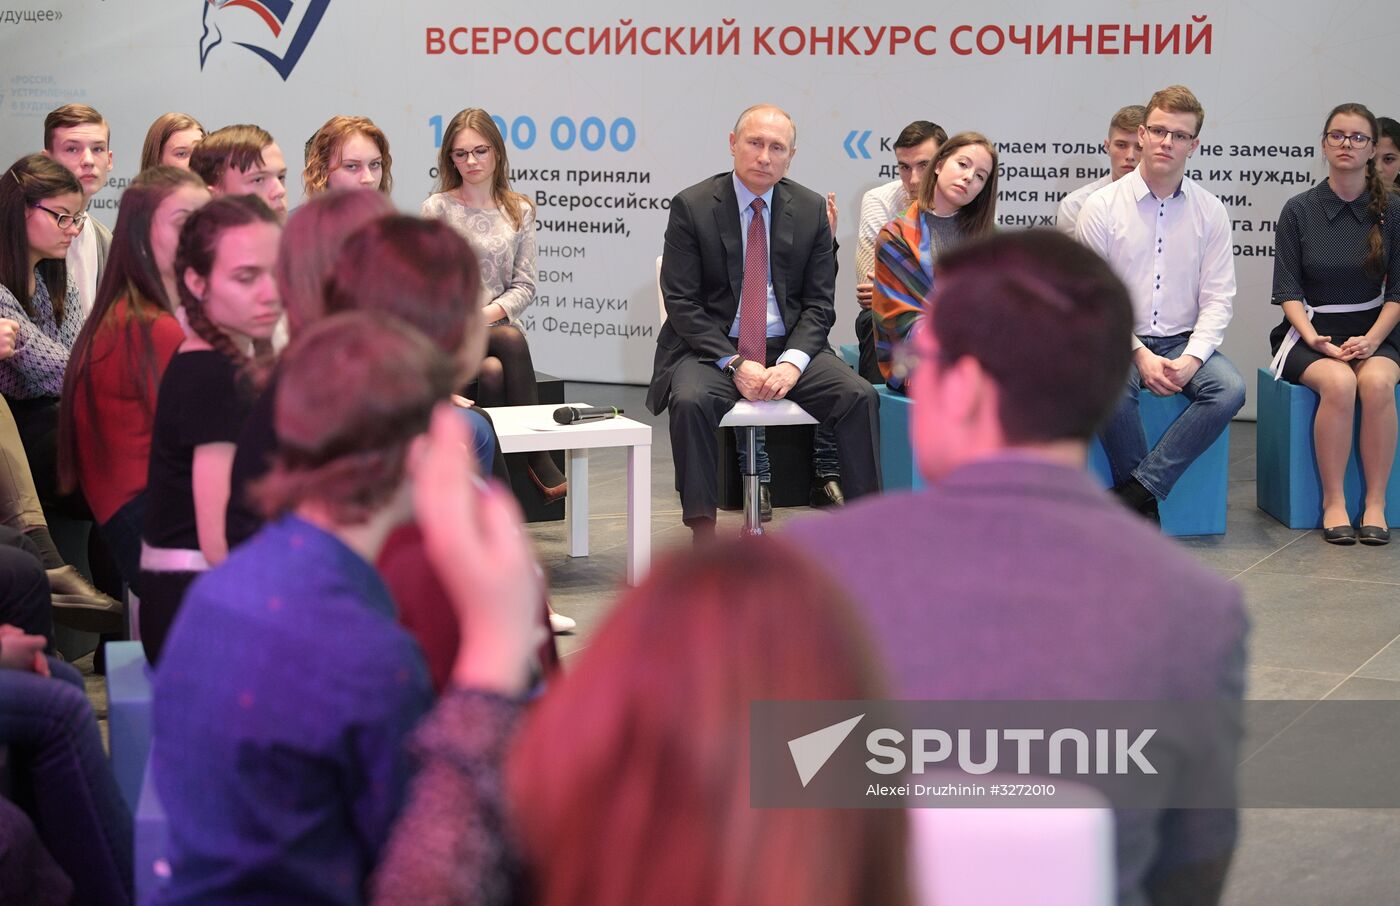 President Putin meets with students who wrote best essays about 'Russia Focused on the Future'